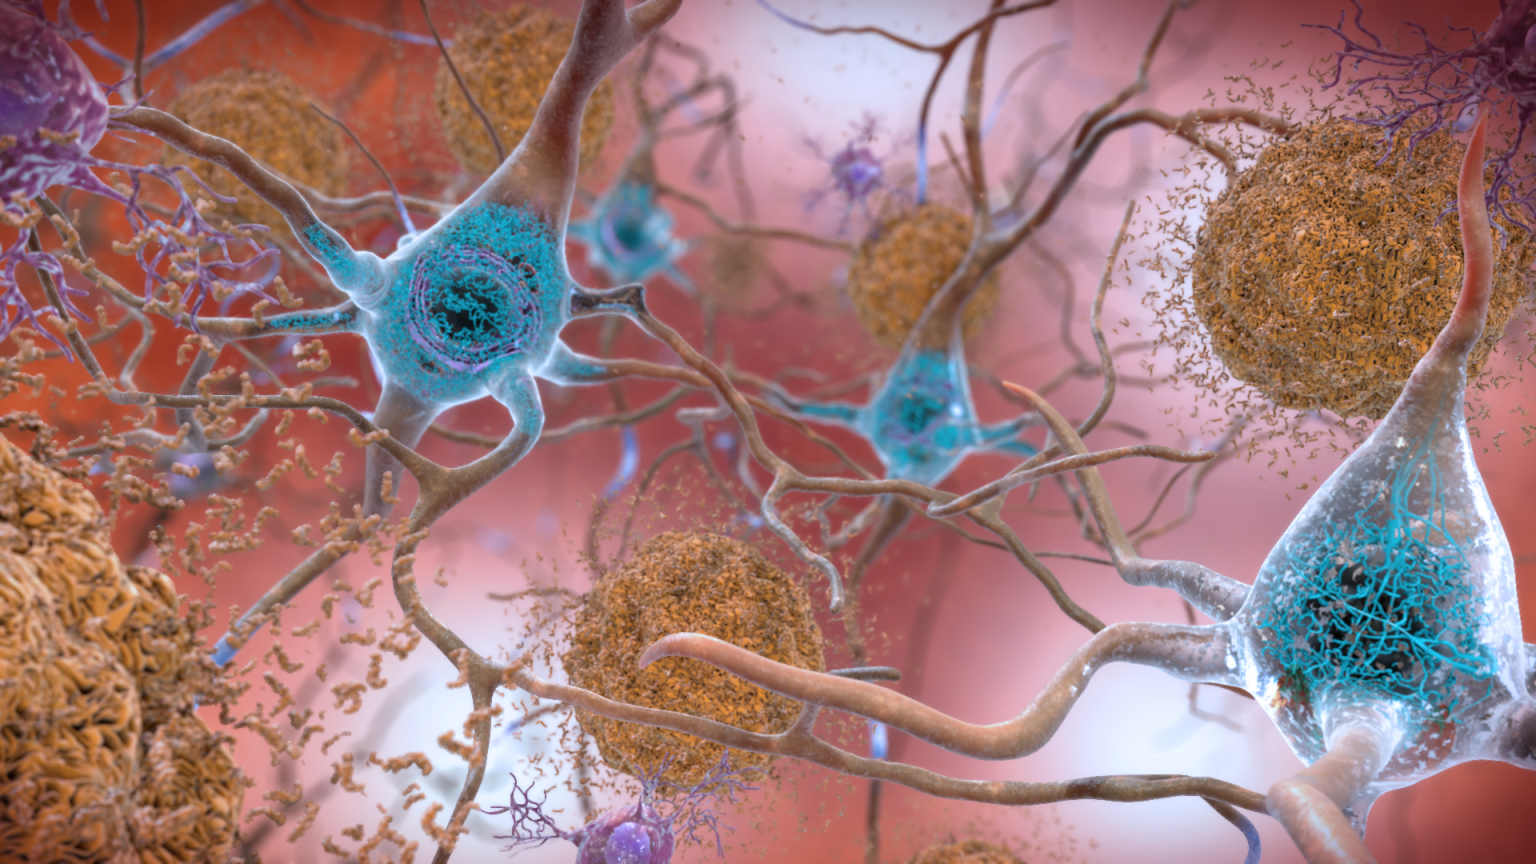 Beta-amyloid plaques and tau proteins assault neurons in a brain changed by Alzheimer's disease